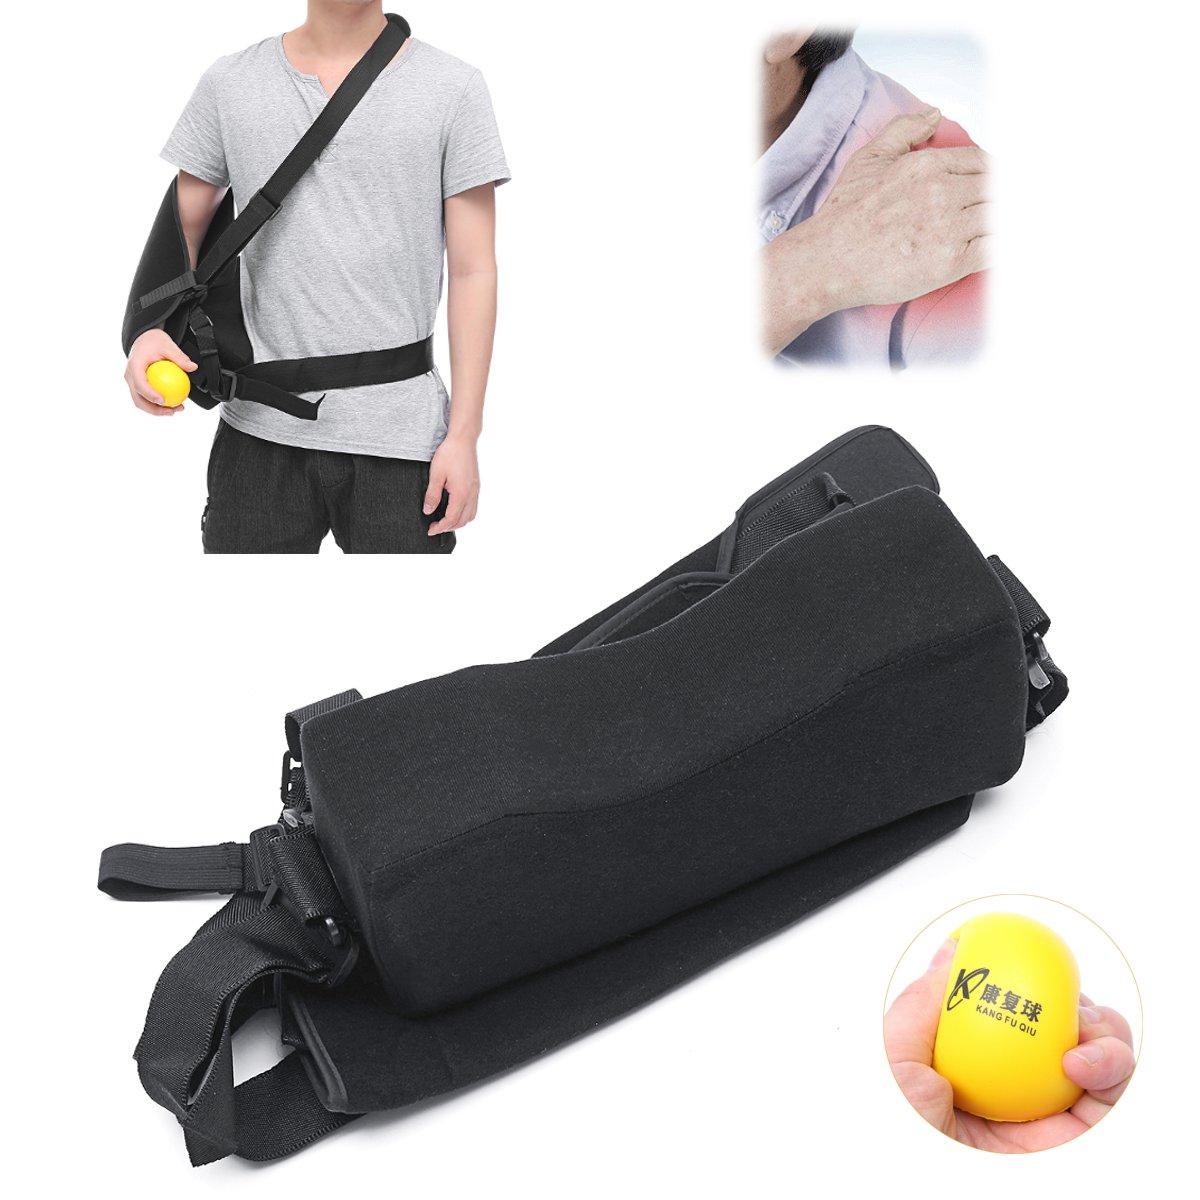 Breathable Comfortable Adjustable Arm Support Outdoor Traveling Personnel Sling Brace Support with Rehabilitation Ball